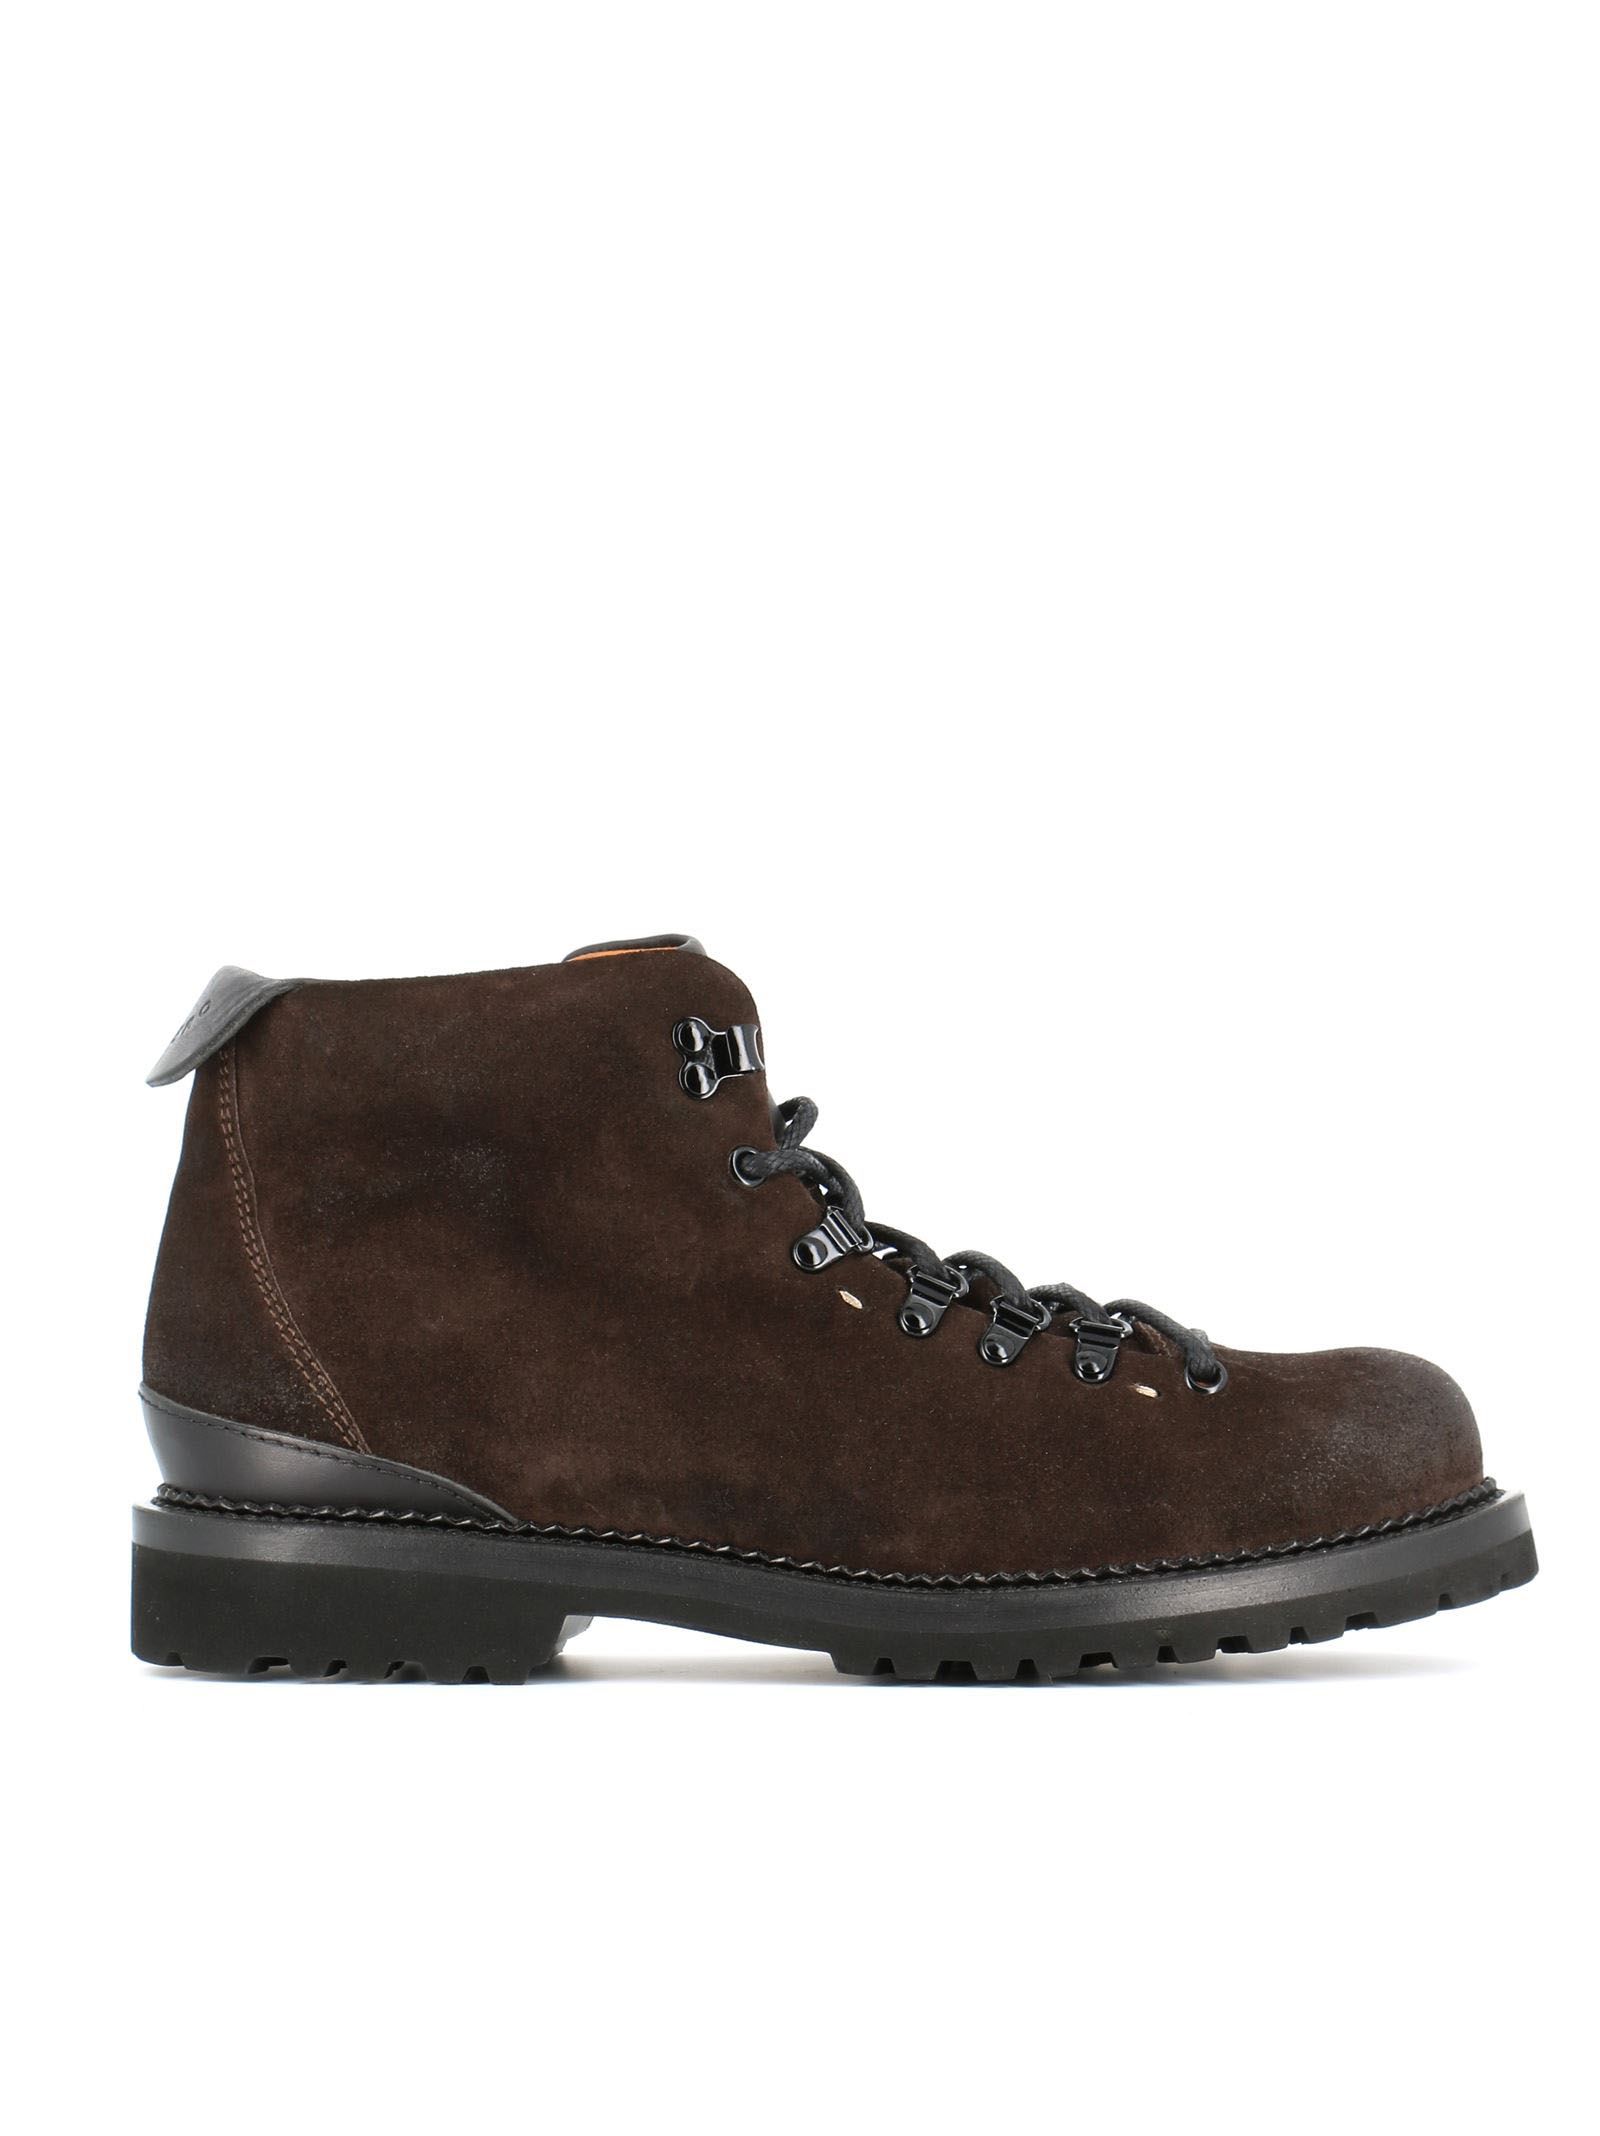 Buttero - Buttero Lace-up Boots - Brown, Men's Boots | Italist